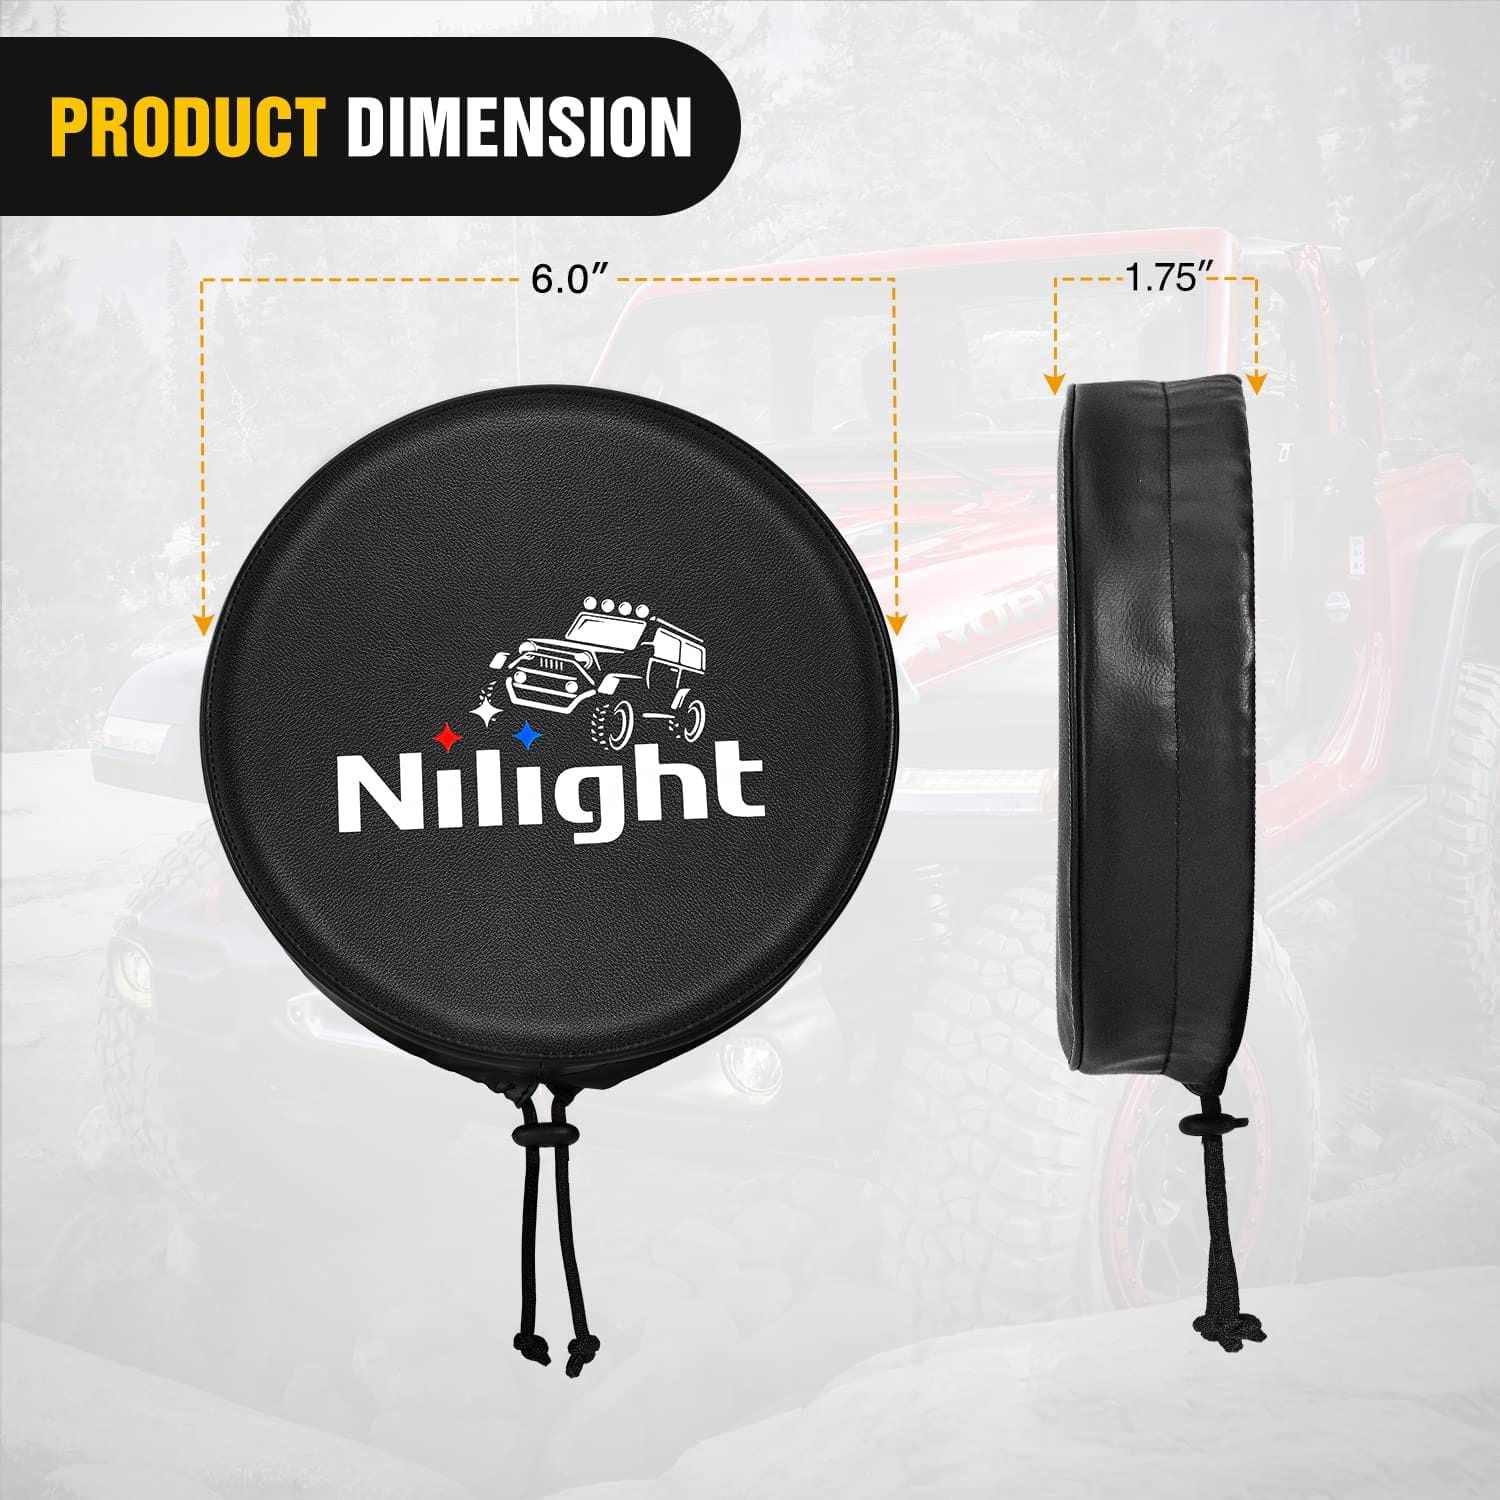 5.75" Round Offroad Driving Pod Light Cover Type B Nilight